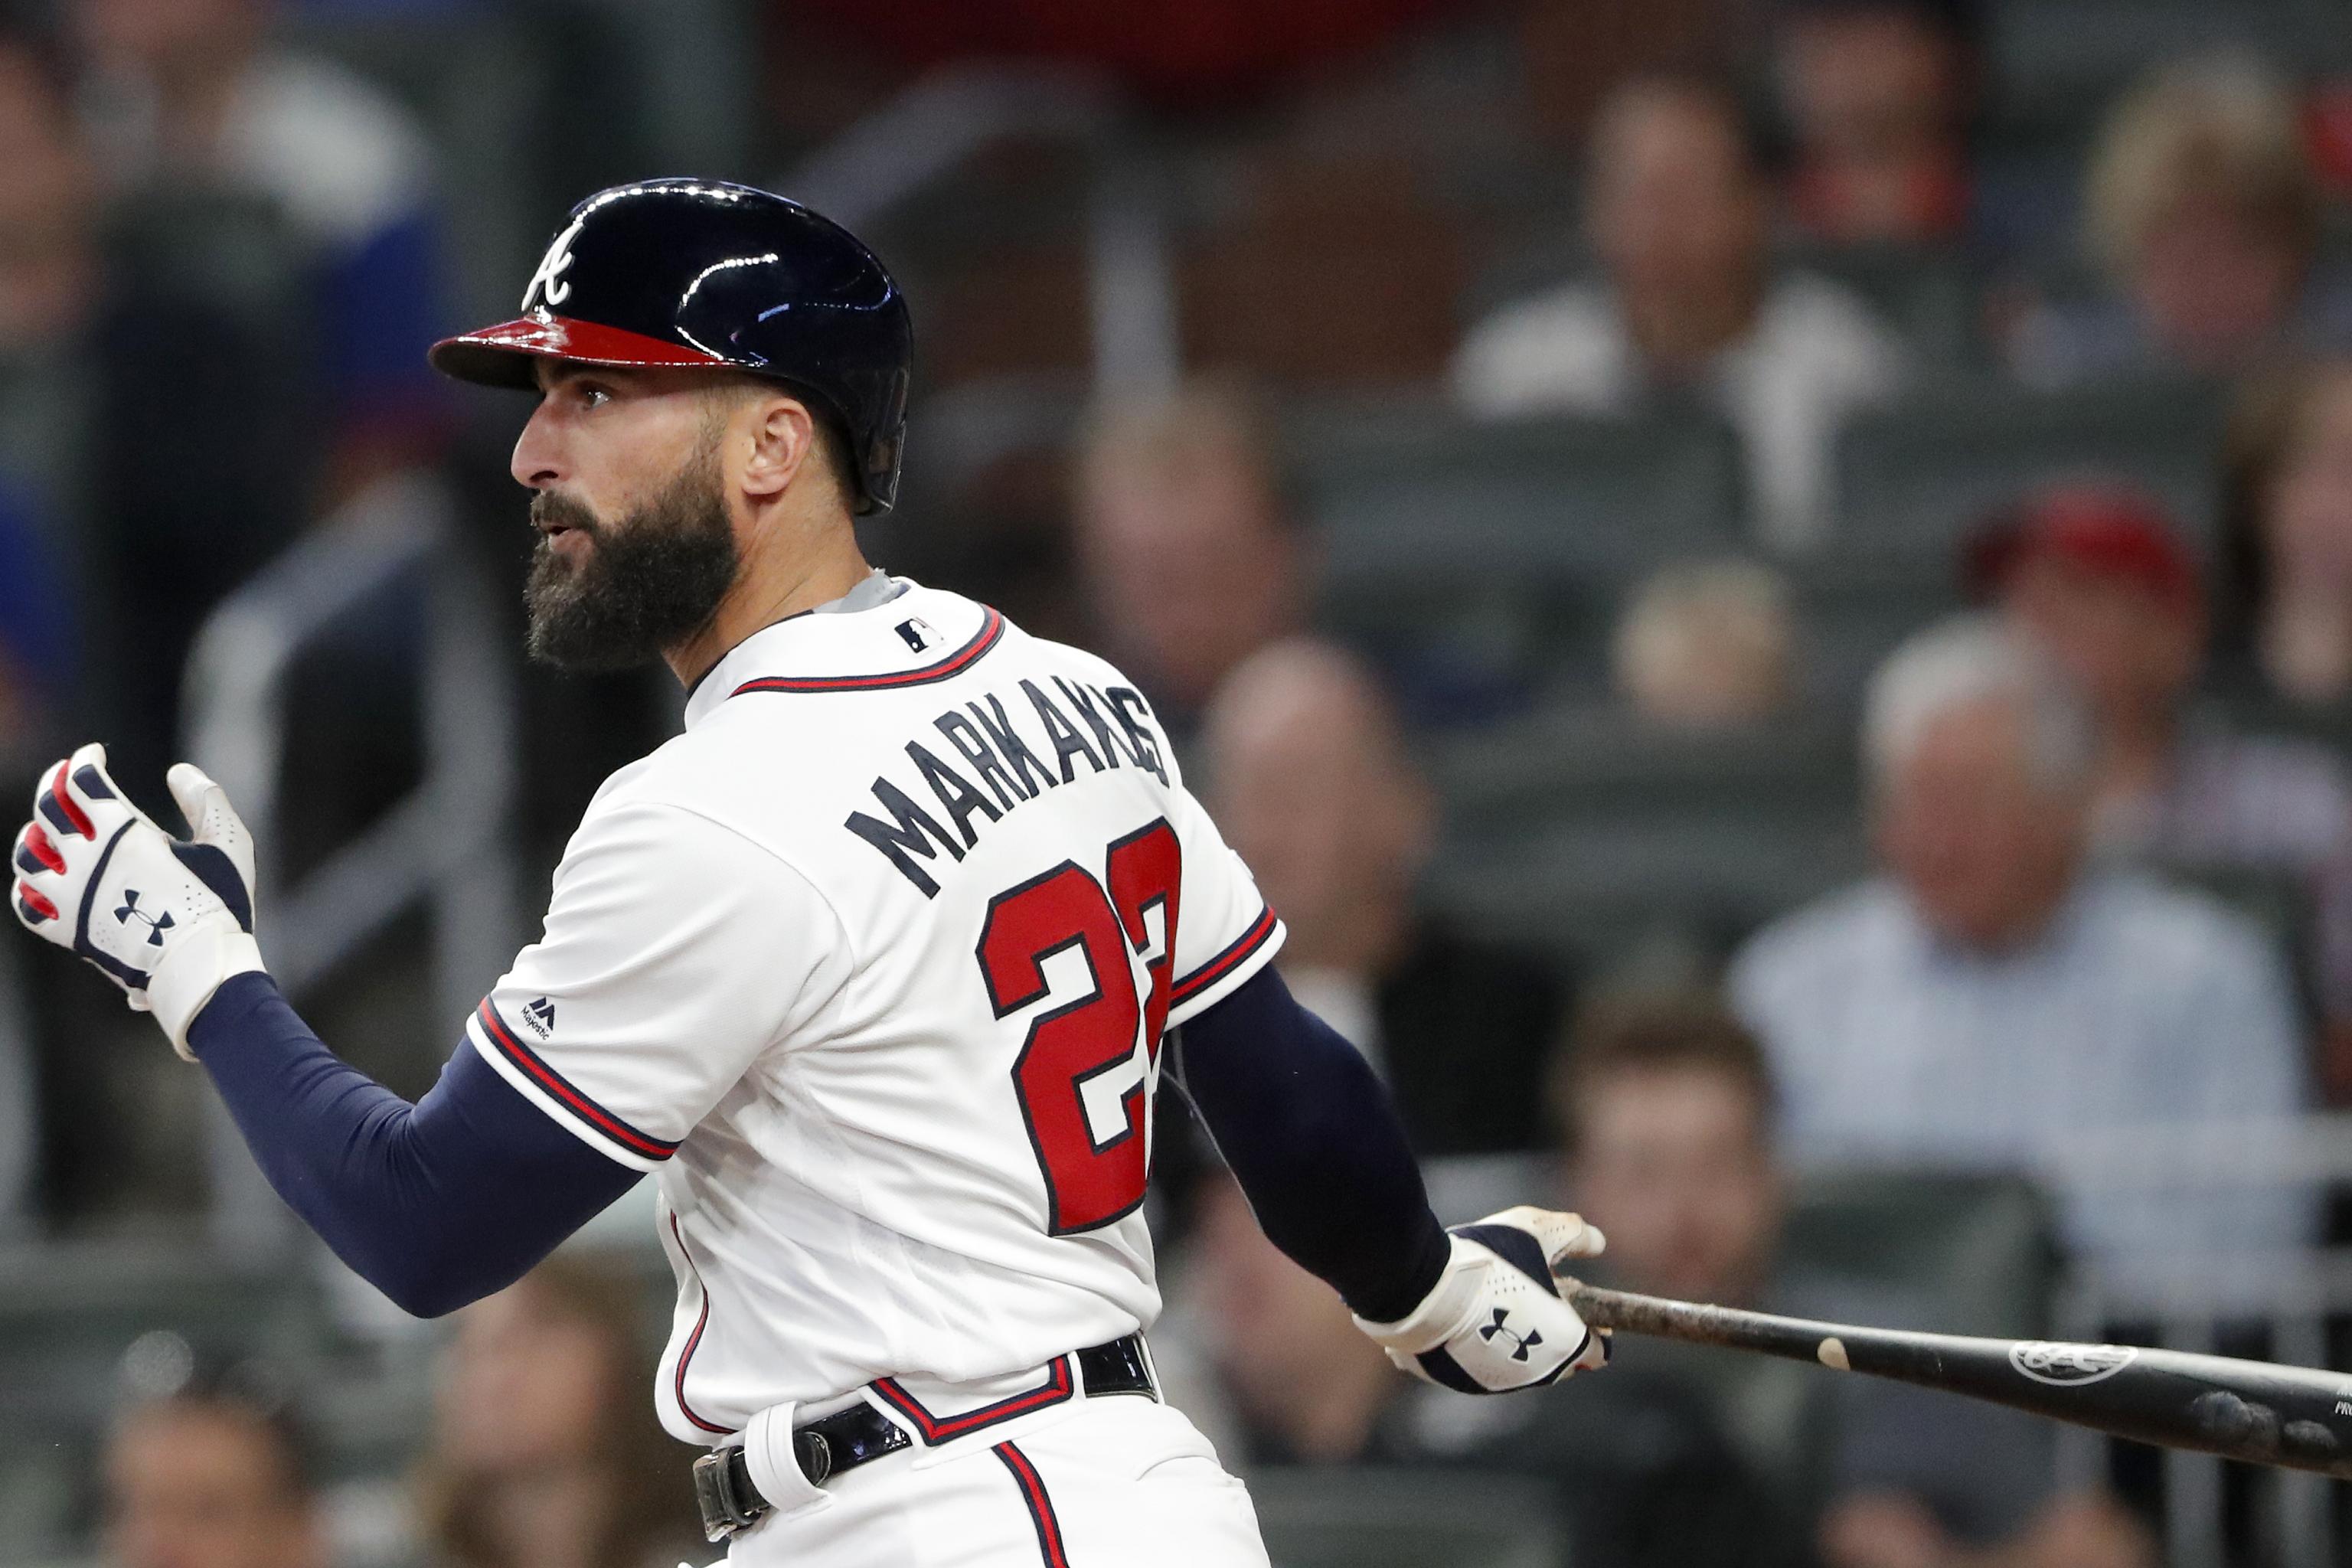 Nick Markakis pushes Atlanta Braves past Chicago Cubs in 10th, Sports